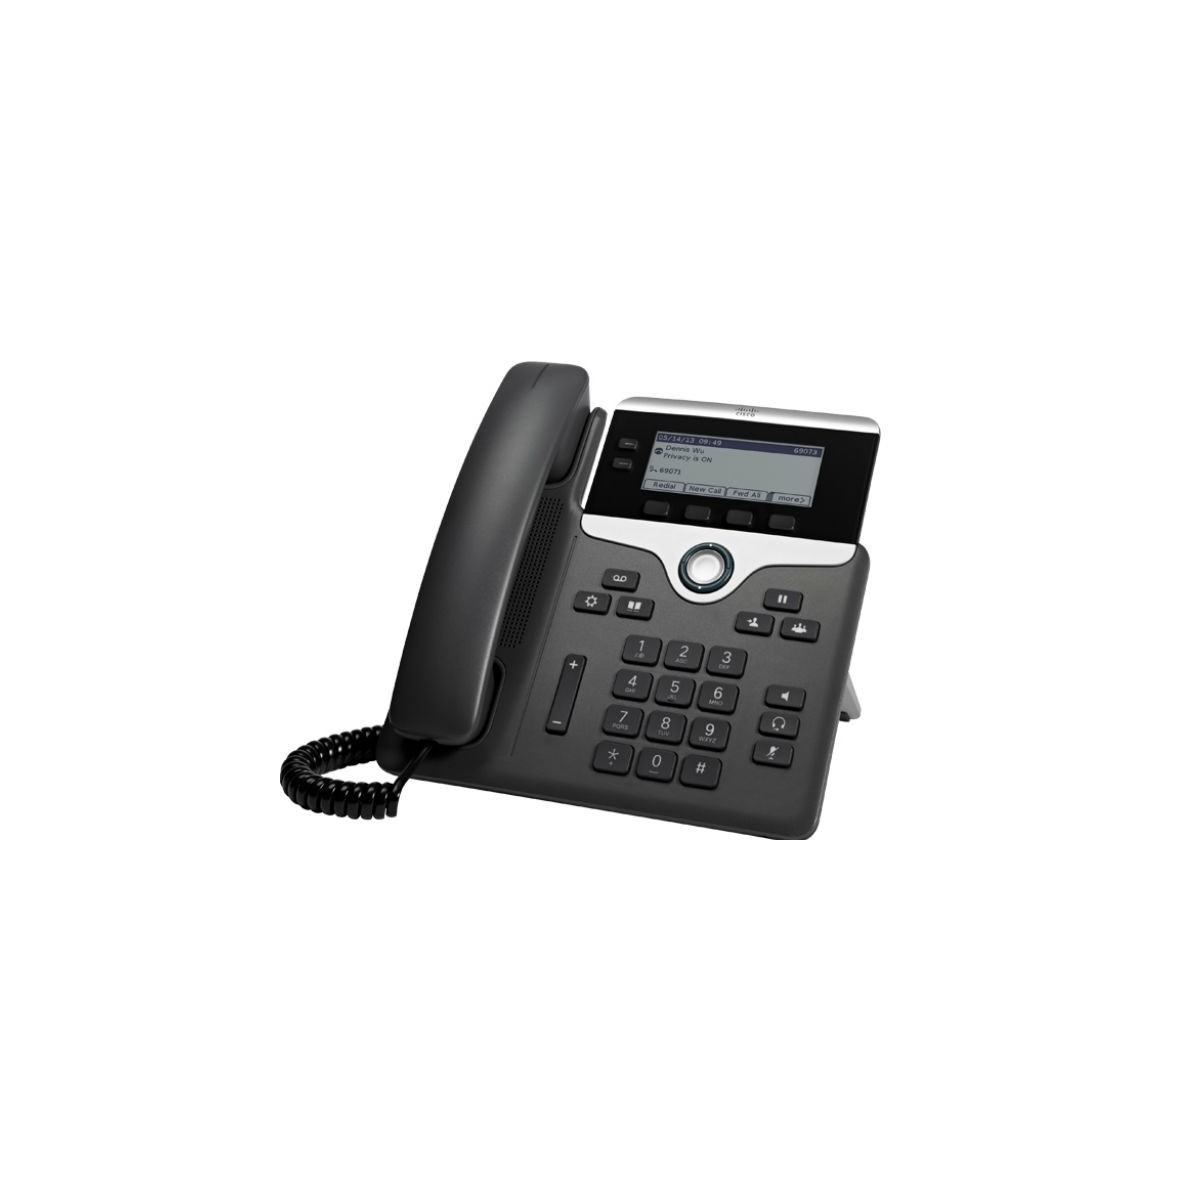 Cisco 7811 - IP Phone - Black - Silver - Wired handset - Polycarbonate - Desk/Wall - 1 lines